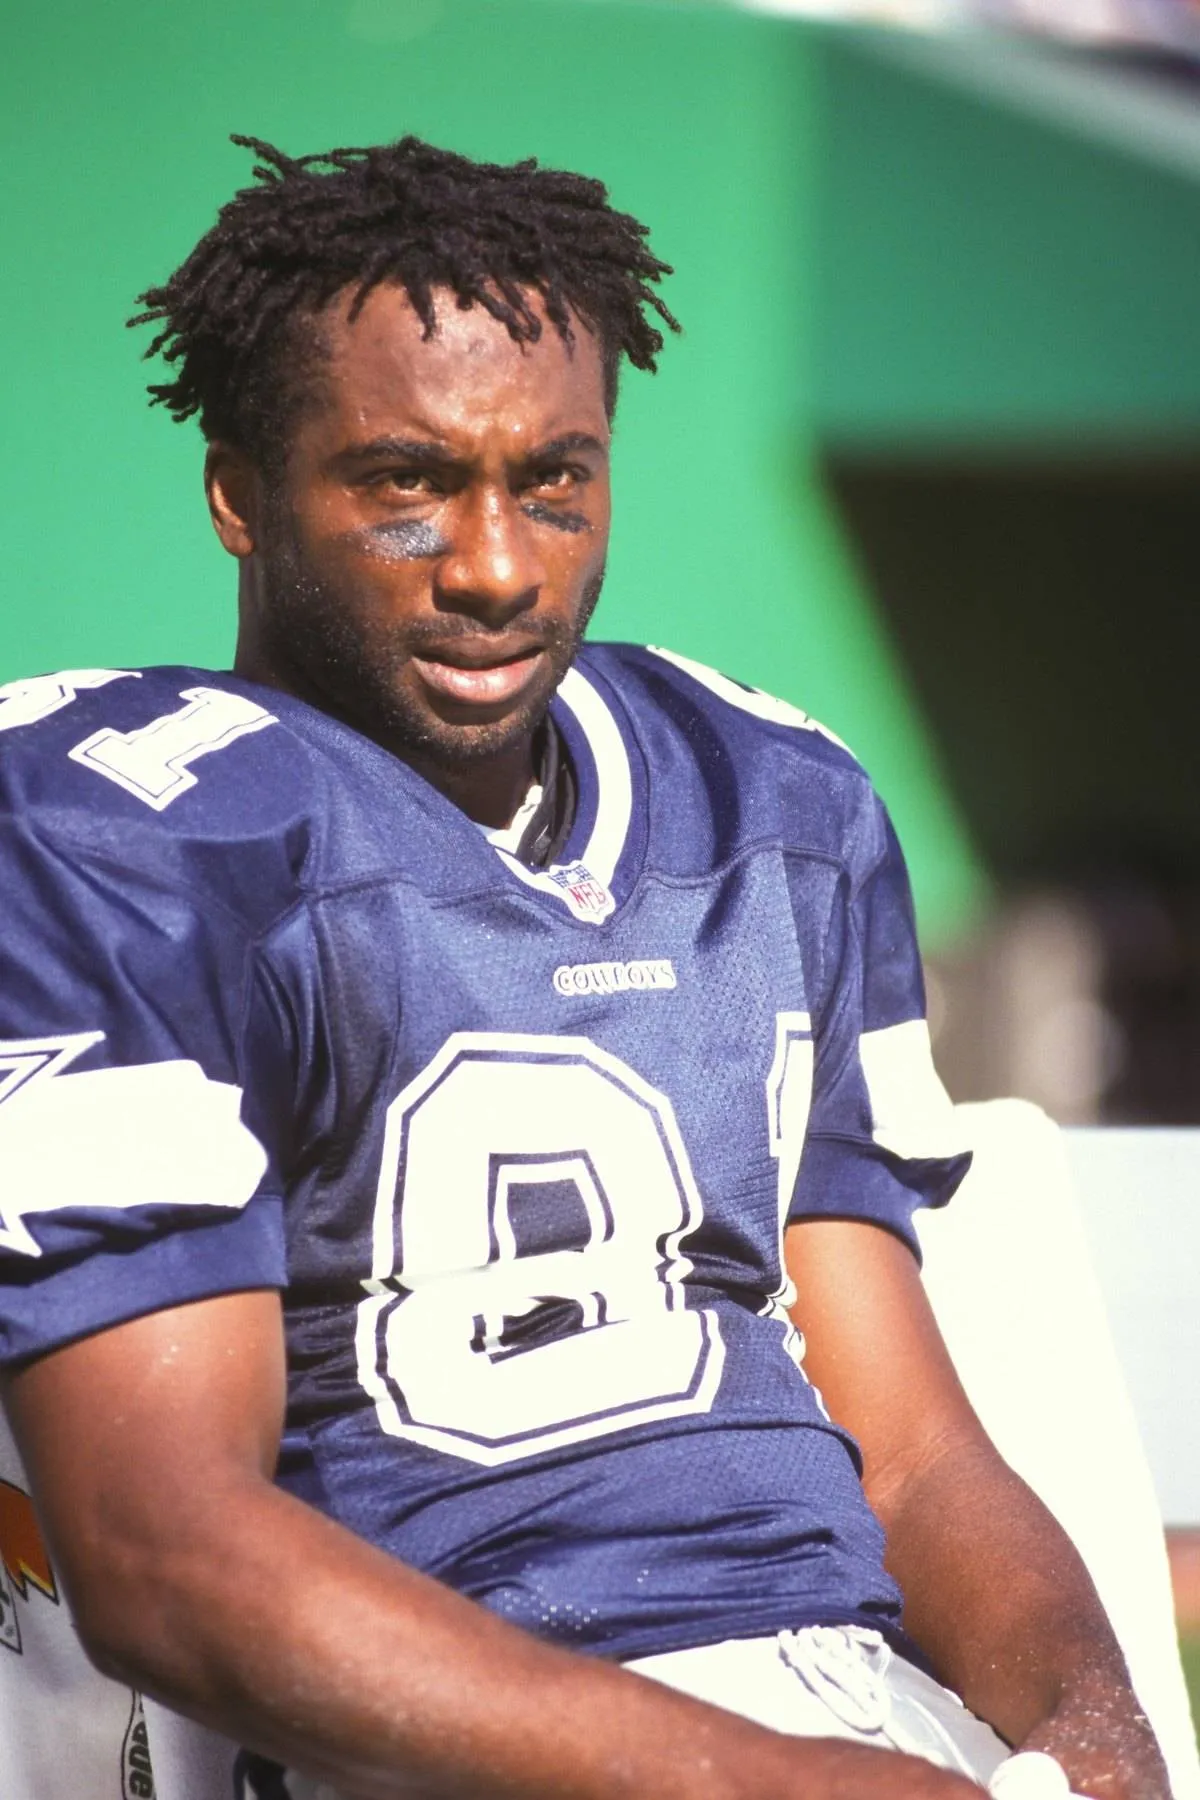 Raghib Ismail #81 of the Dallaas Cowboys looks on during a NFL football game against the Washington Redskins on September 12, 1999 at Jack Kente Cooke Stadium in Landover, Maryland